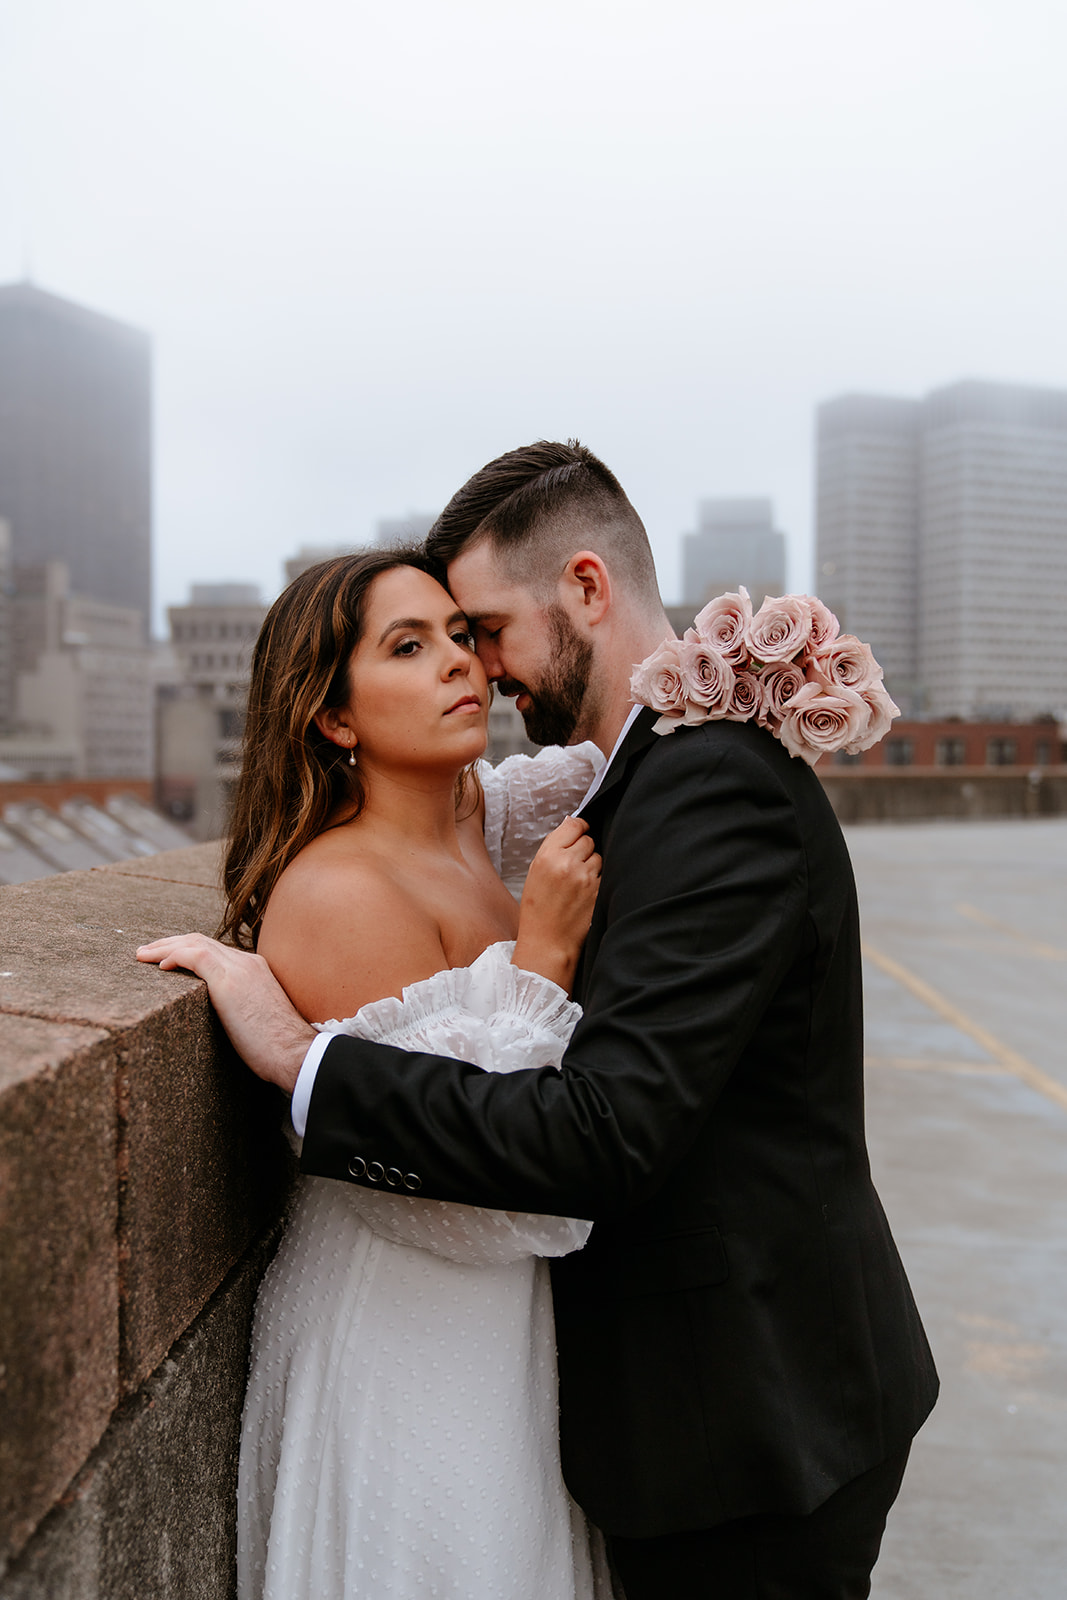 A couple stands on a rooftop parking garage in formal attire;Buildings and a foggy sky are visible in the background for their engagement photos